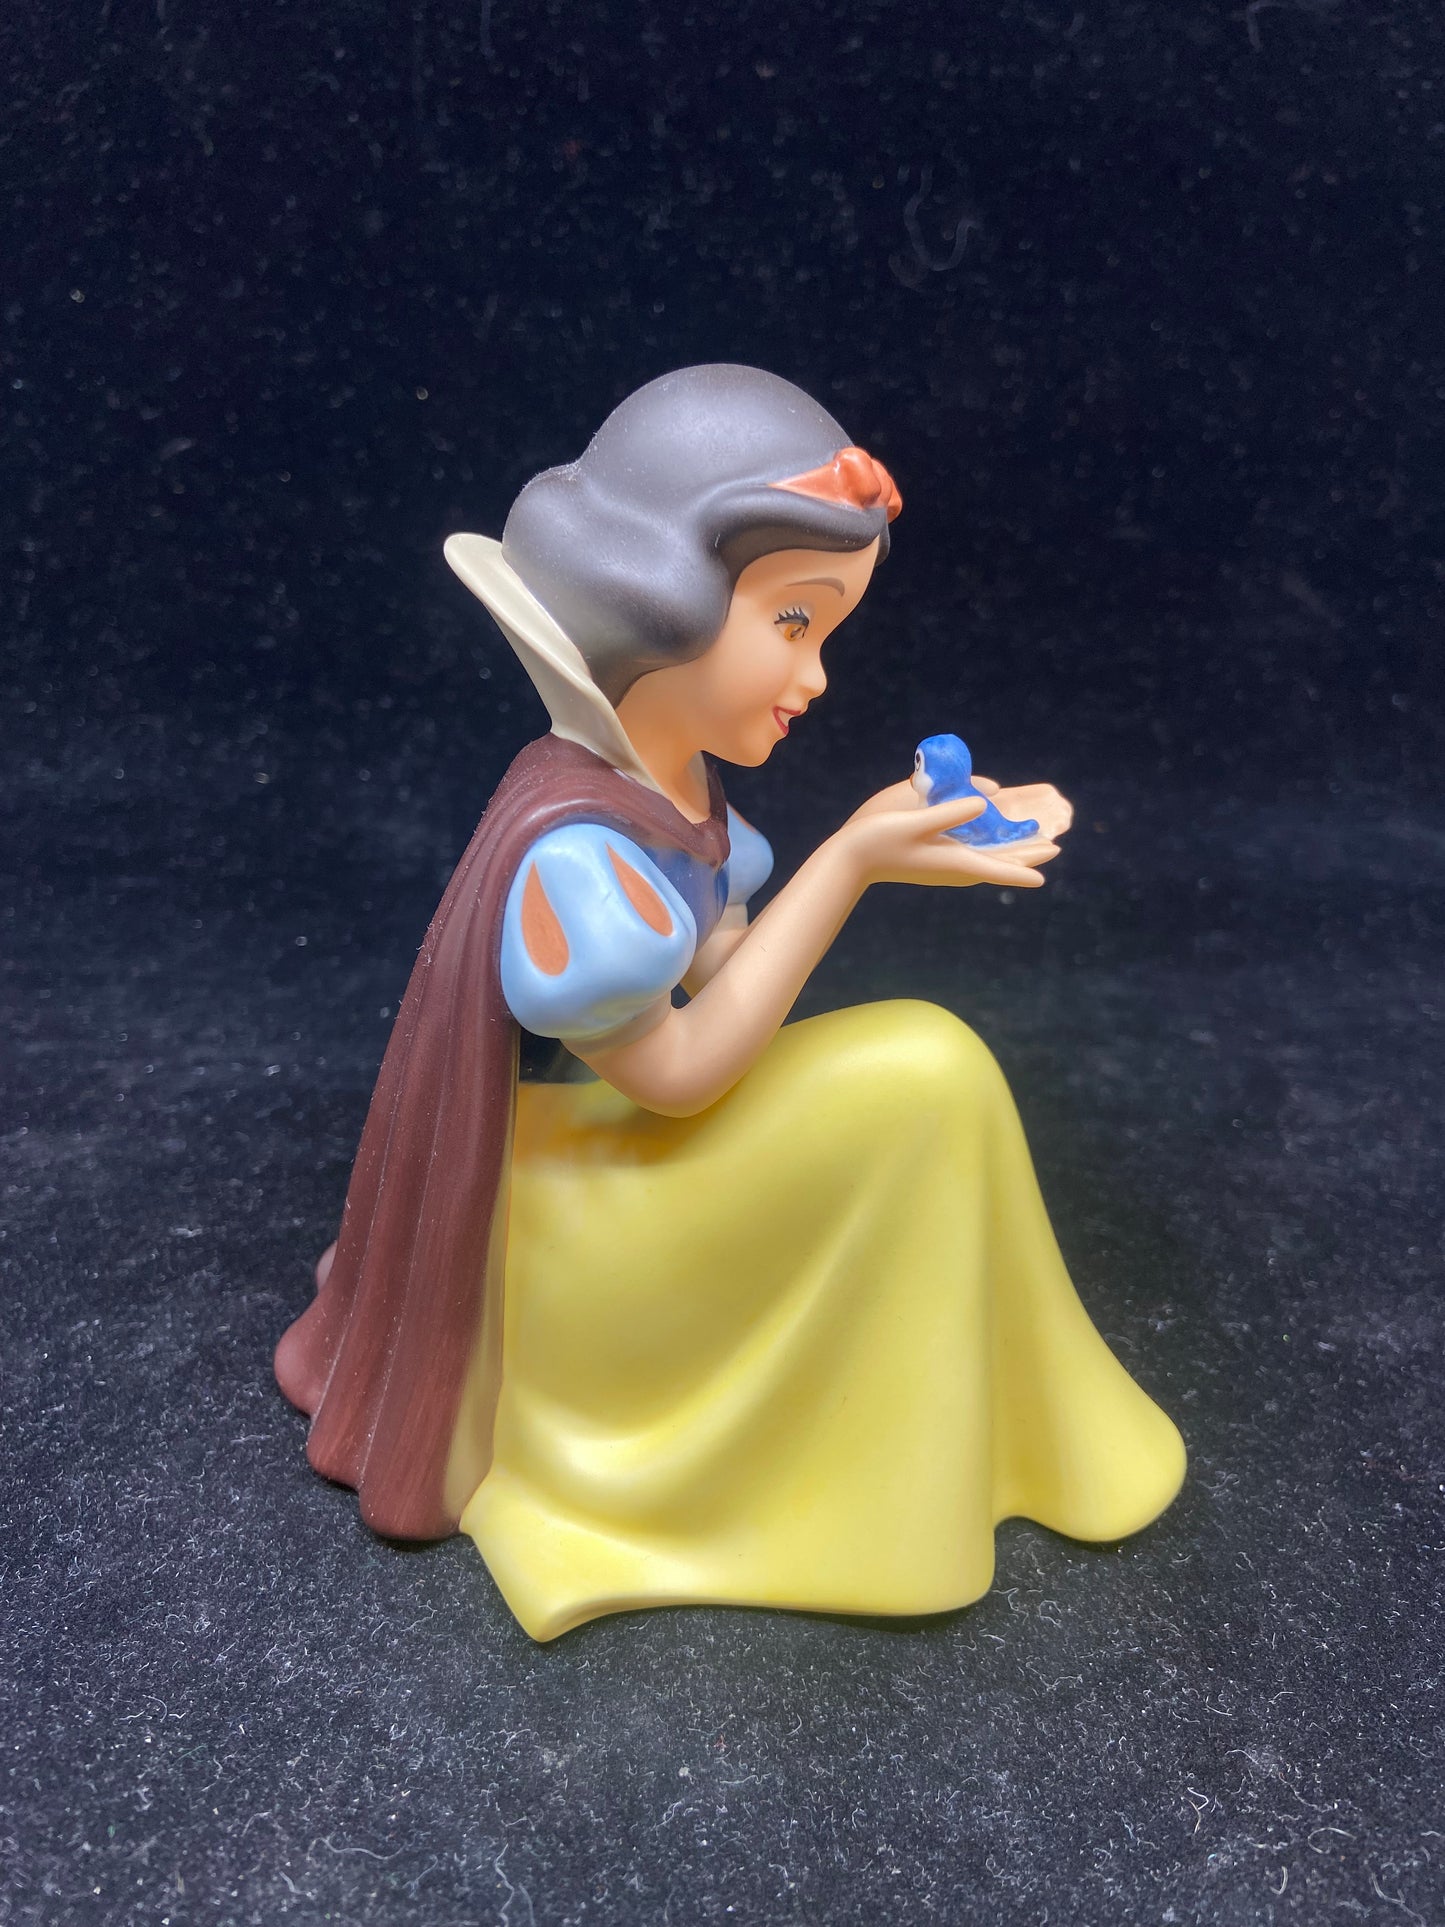 Walt Disney Collectors Society "Won't You Save Me?" Snow White 65th Anniversary Statue (23663)